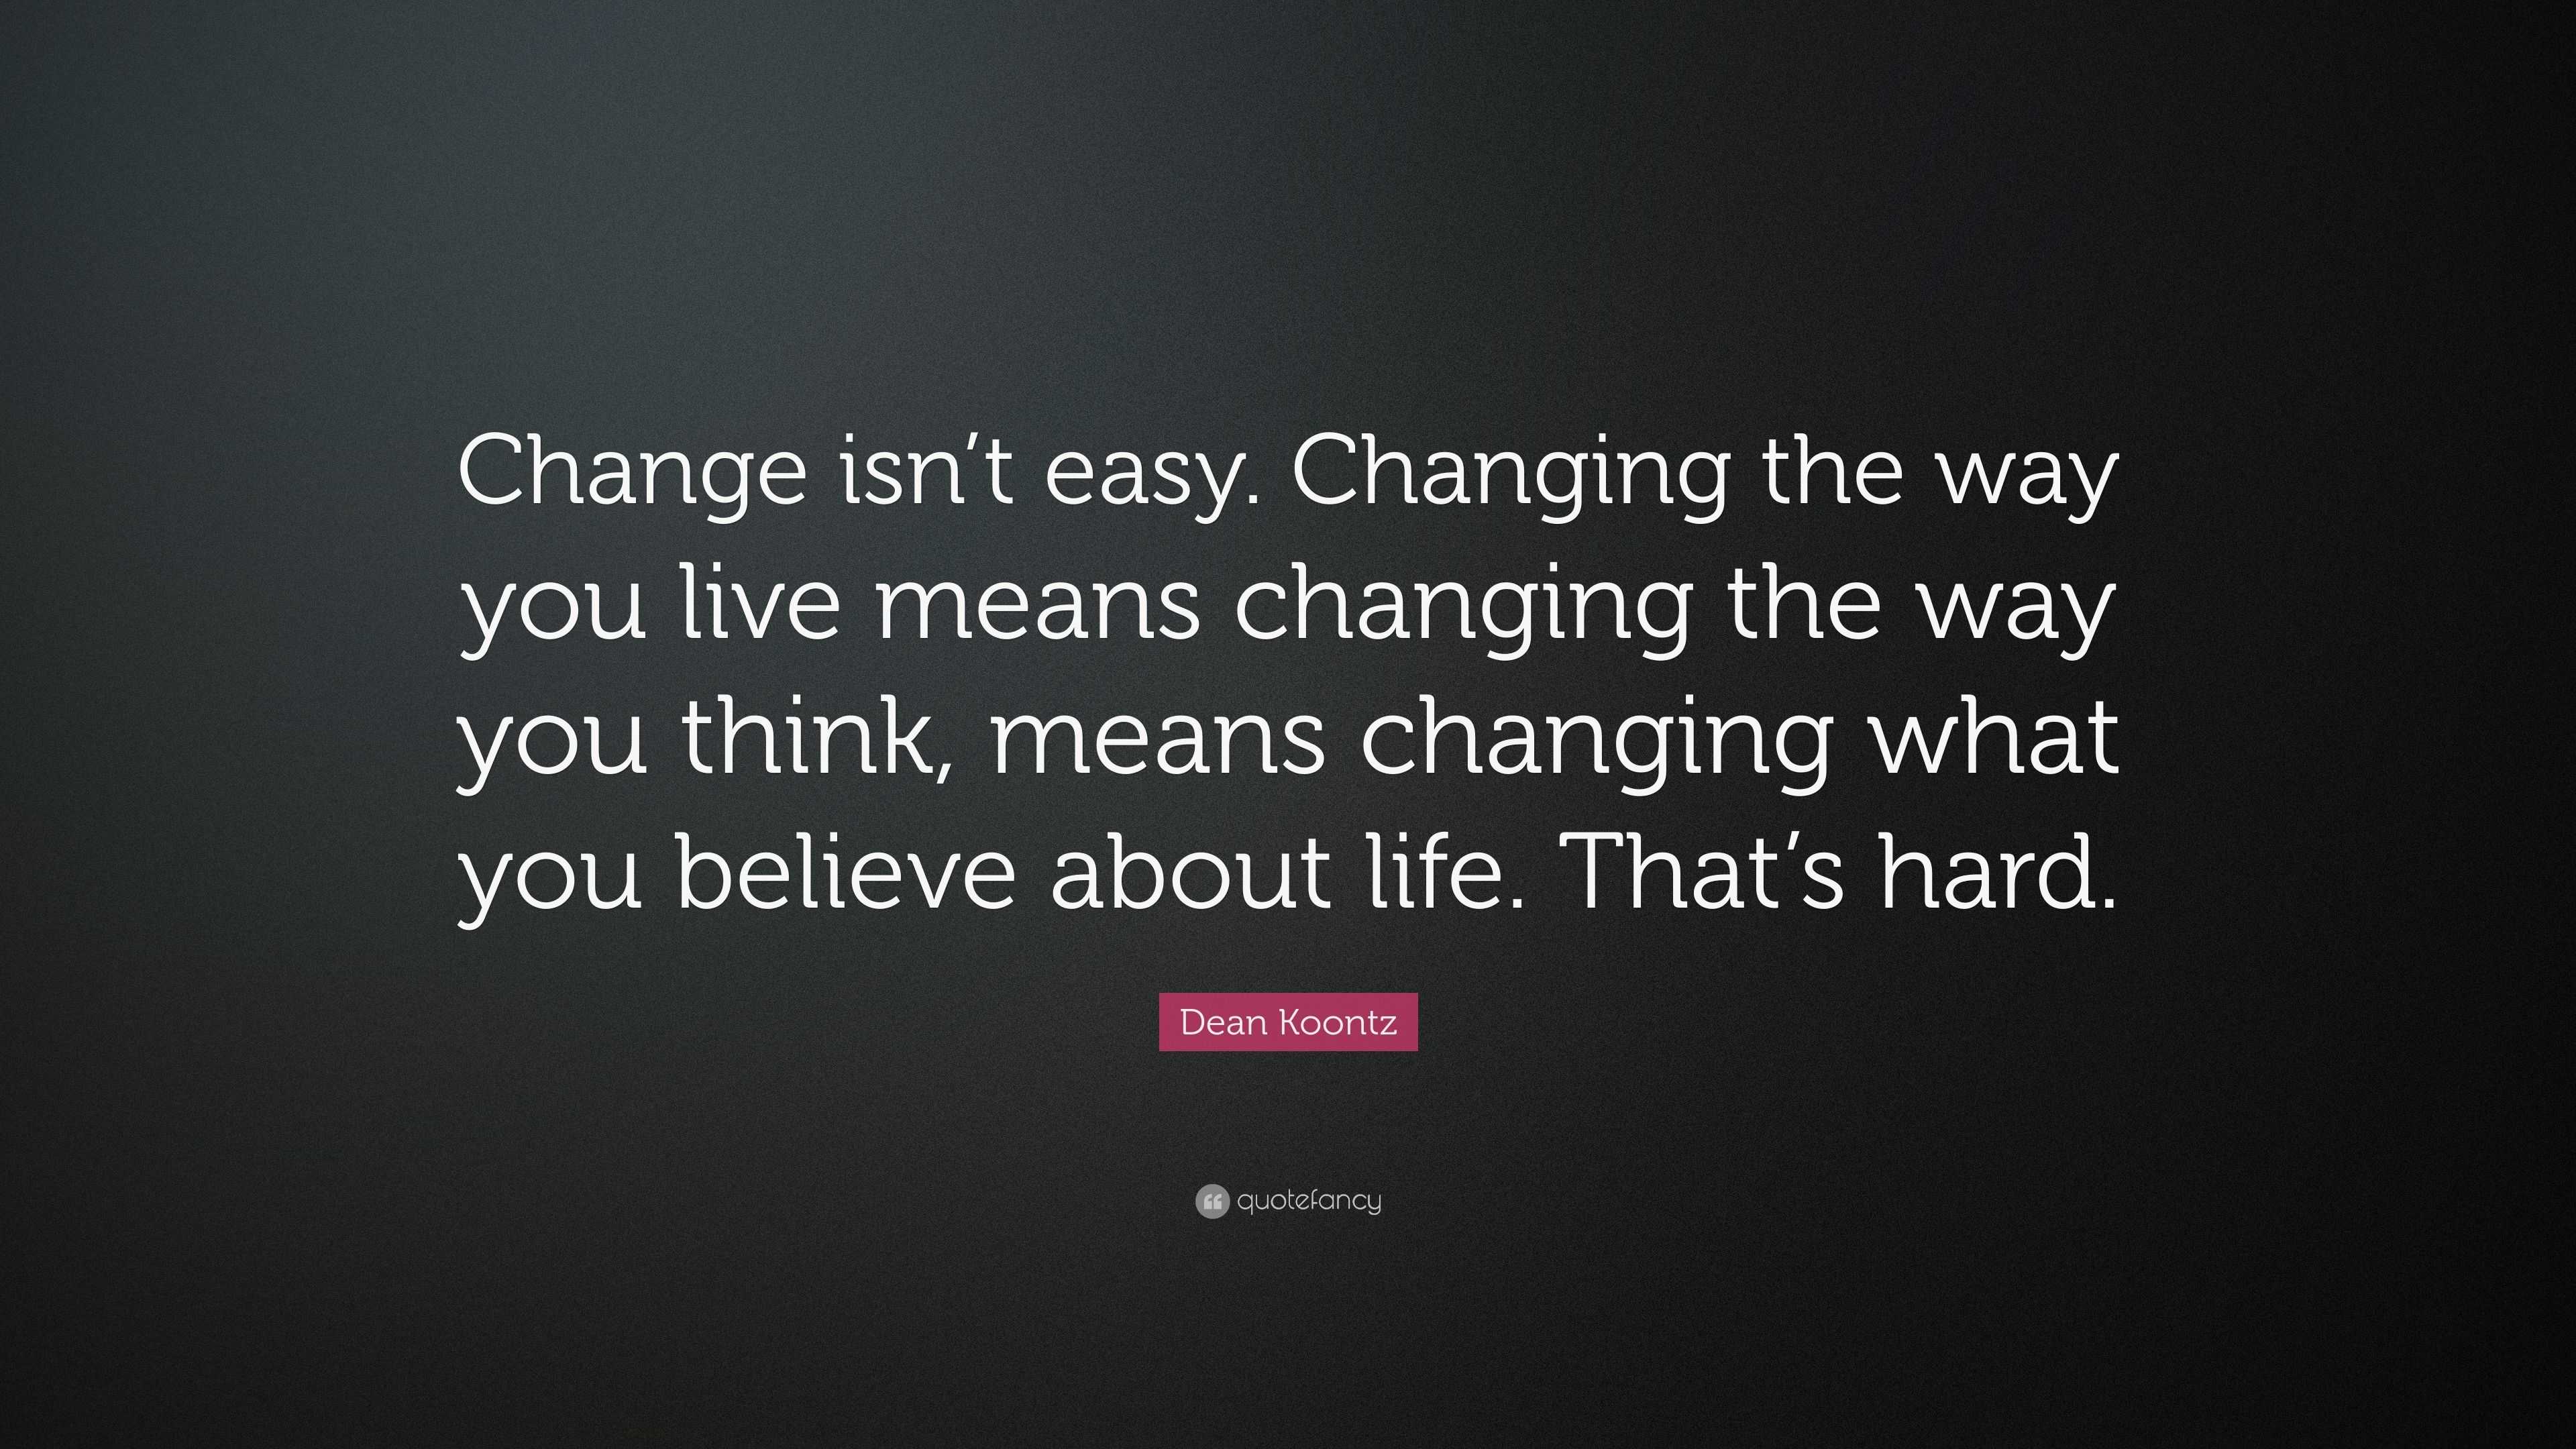 Dean Koontz Quote: “Change isn’t easy. Changing the way you live means ...